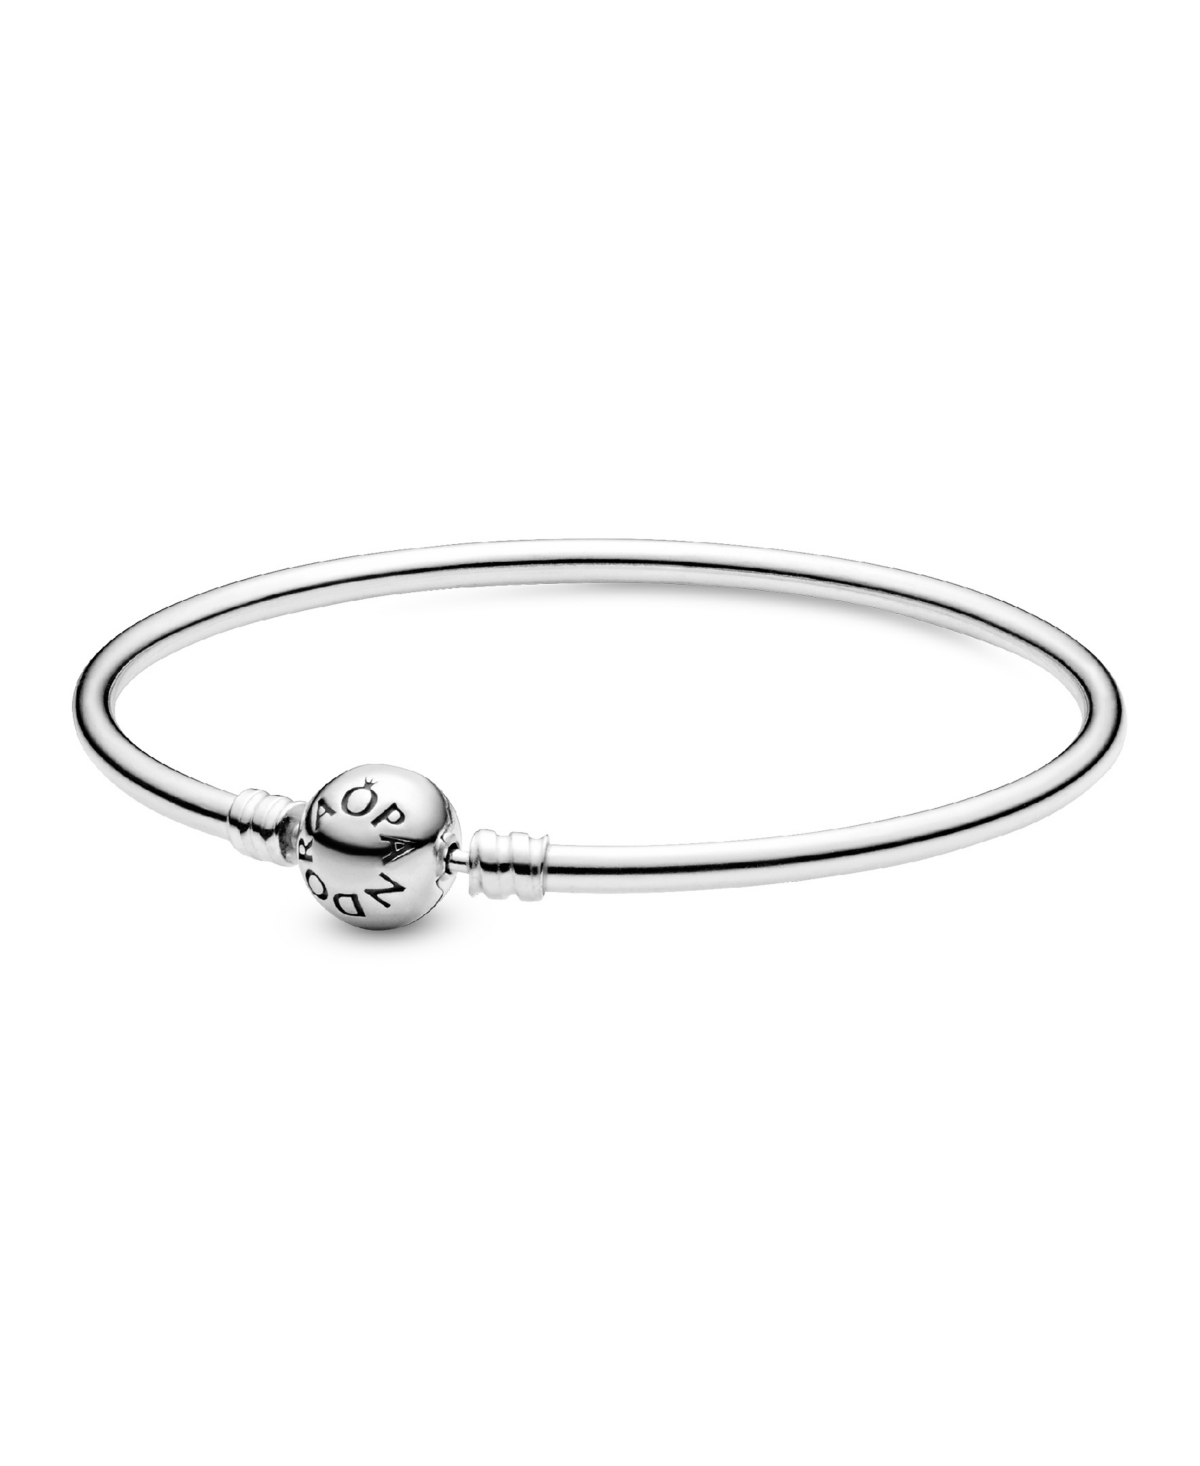 Moments Sterling Silver Clasp Closure Bangle Bracelet - Silver